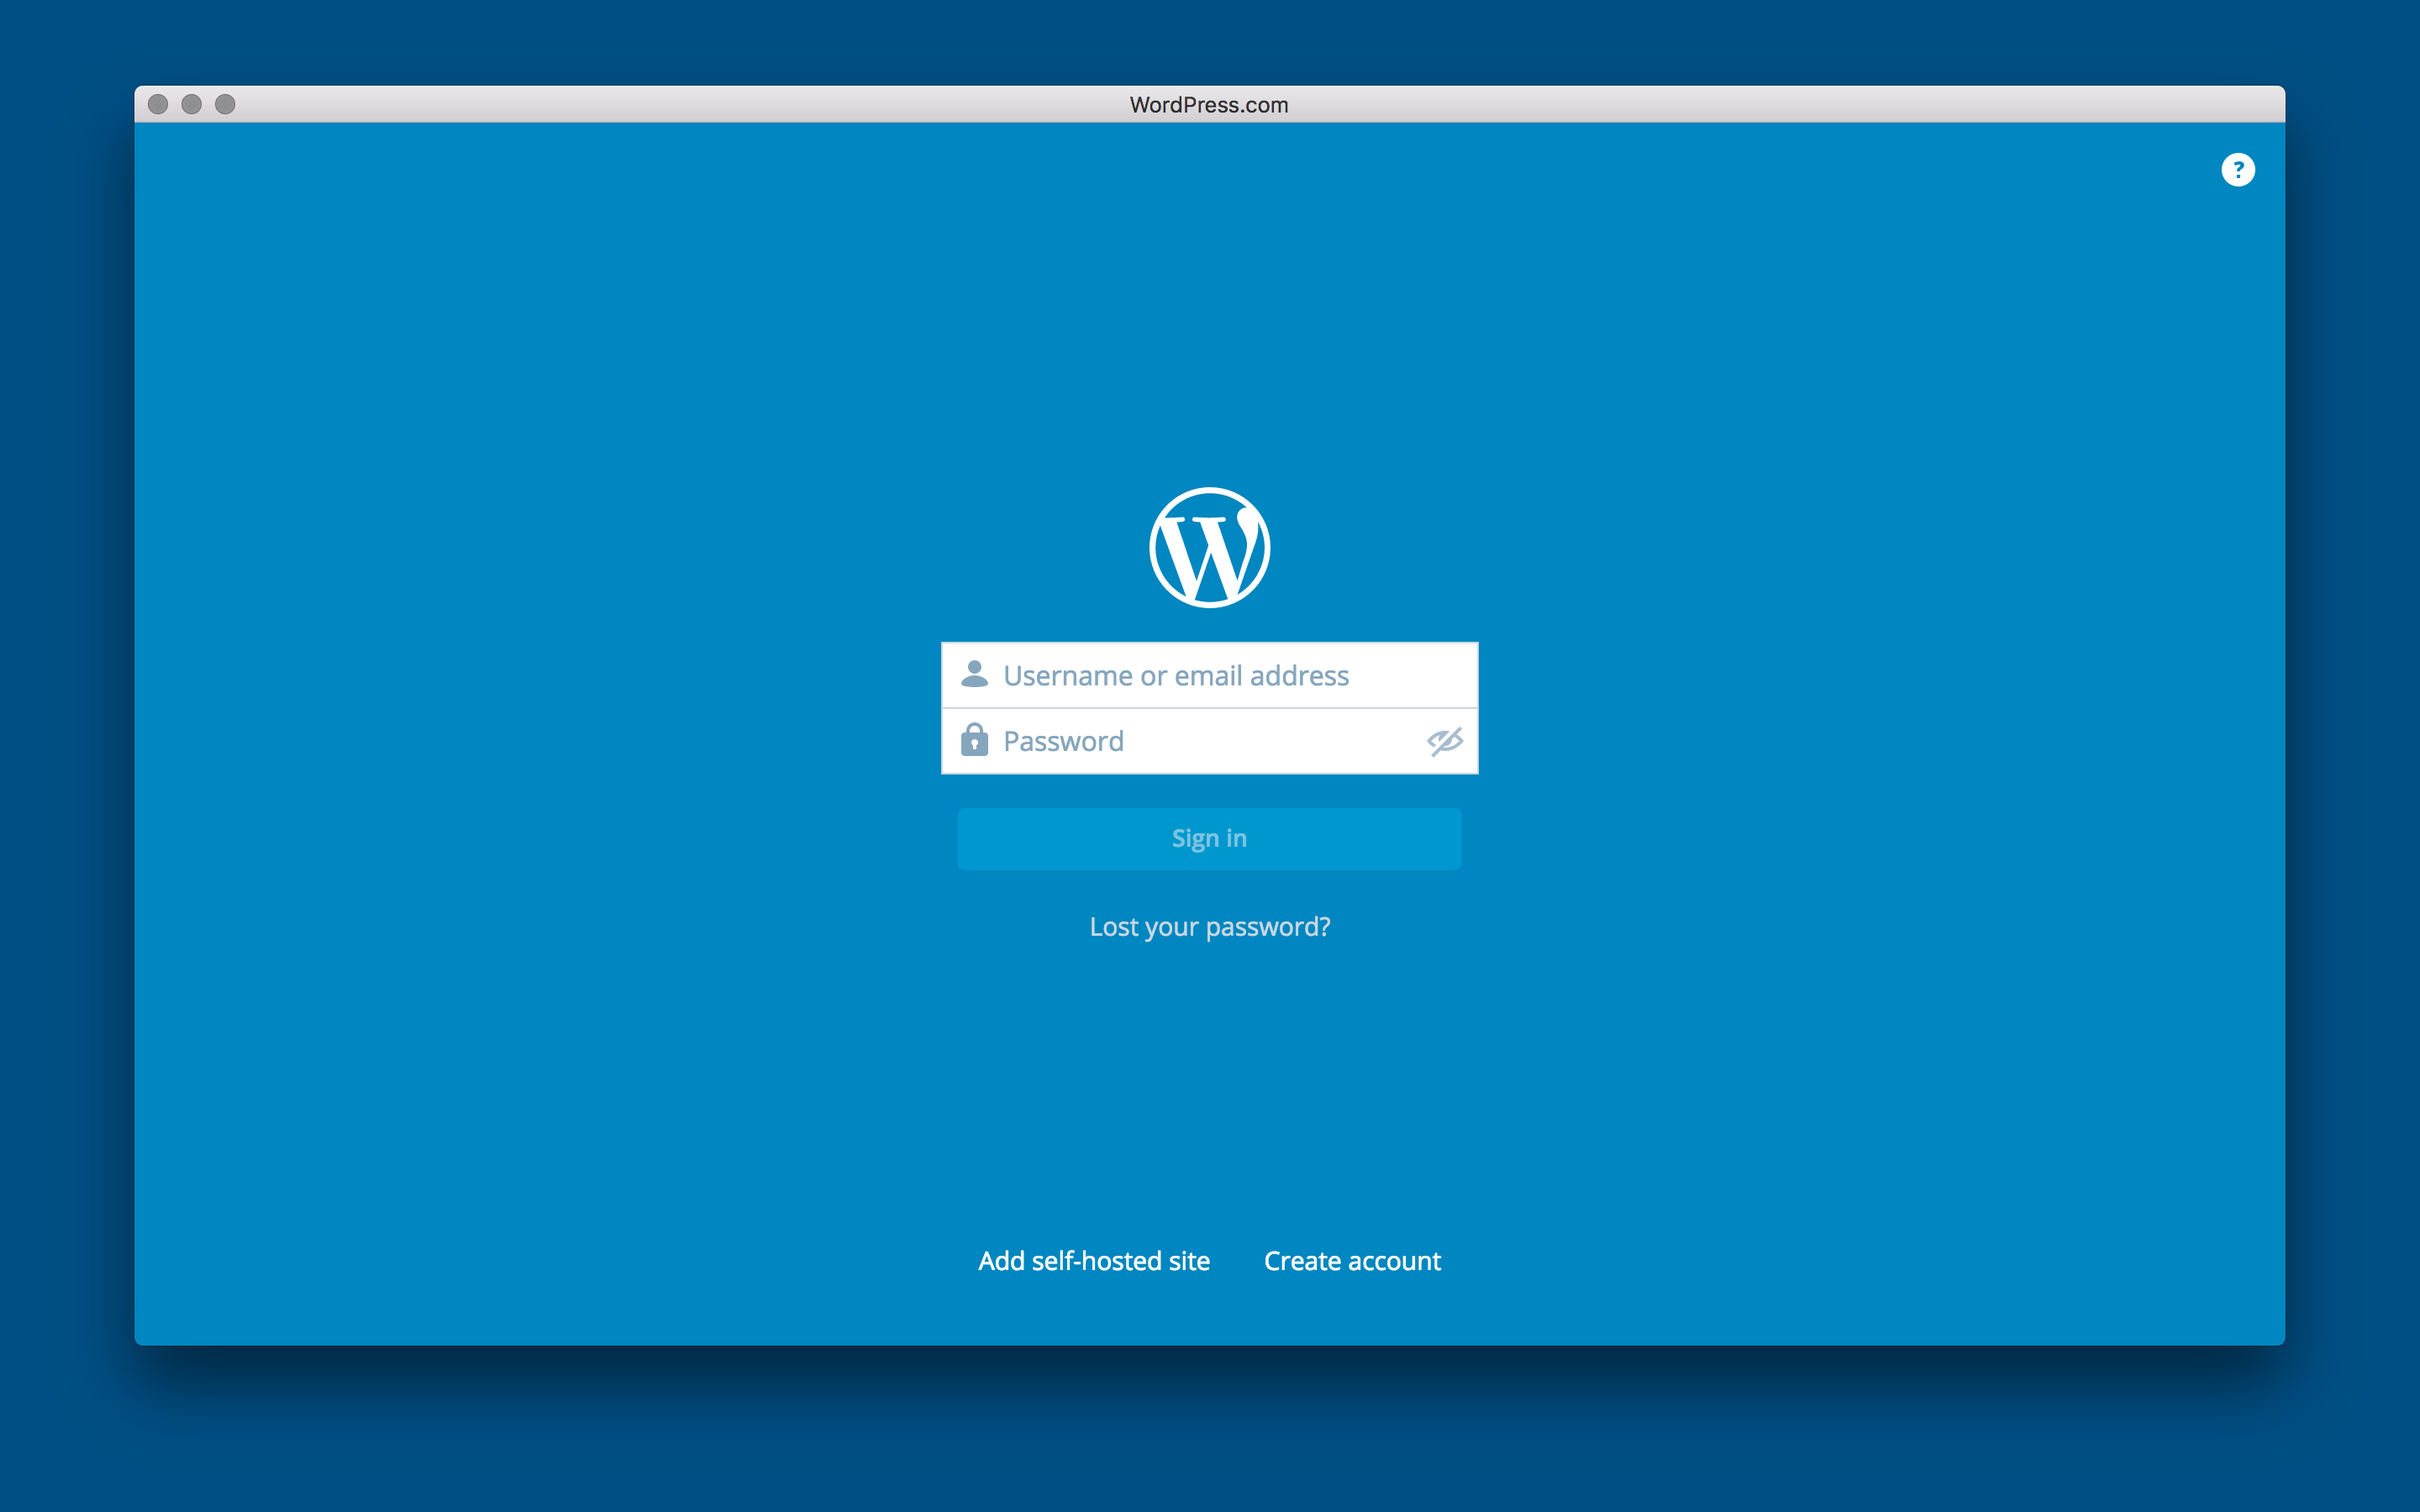 WordPress launches its own desktop app for Mac OS X